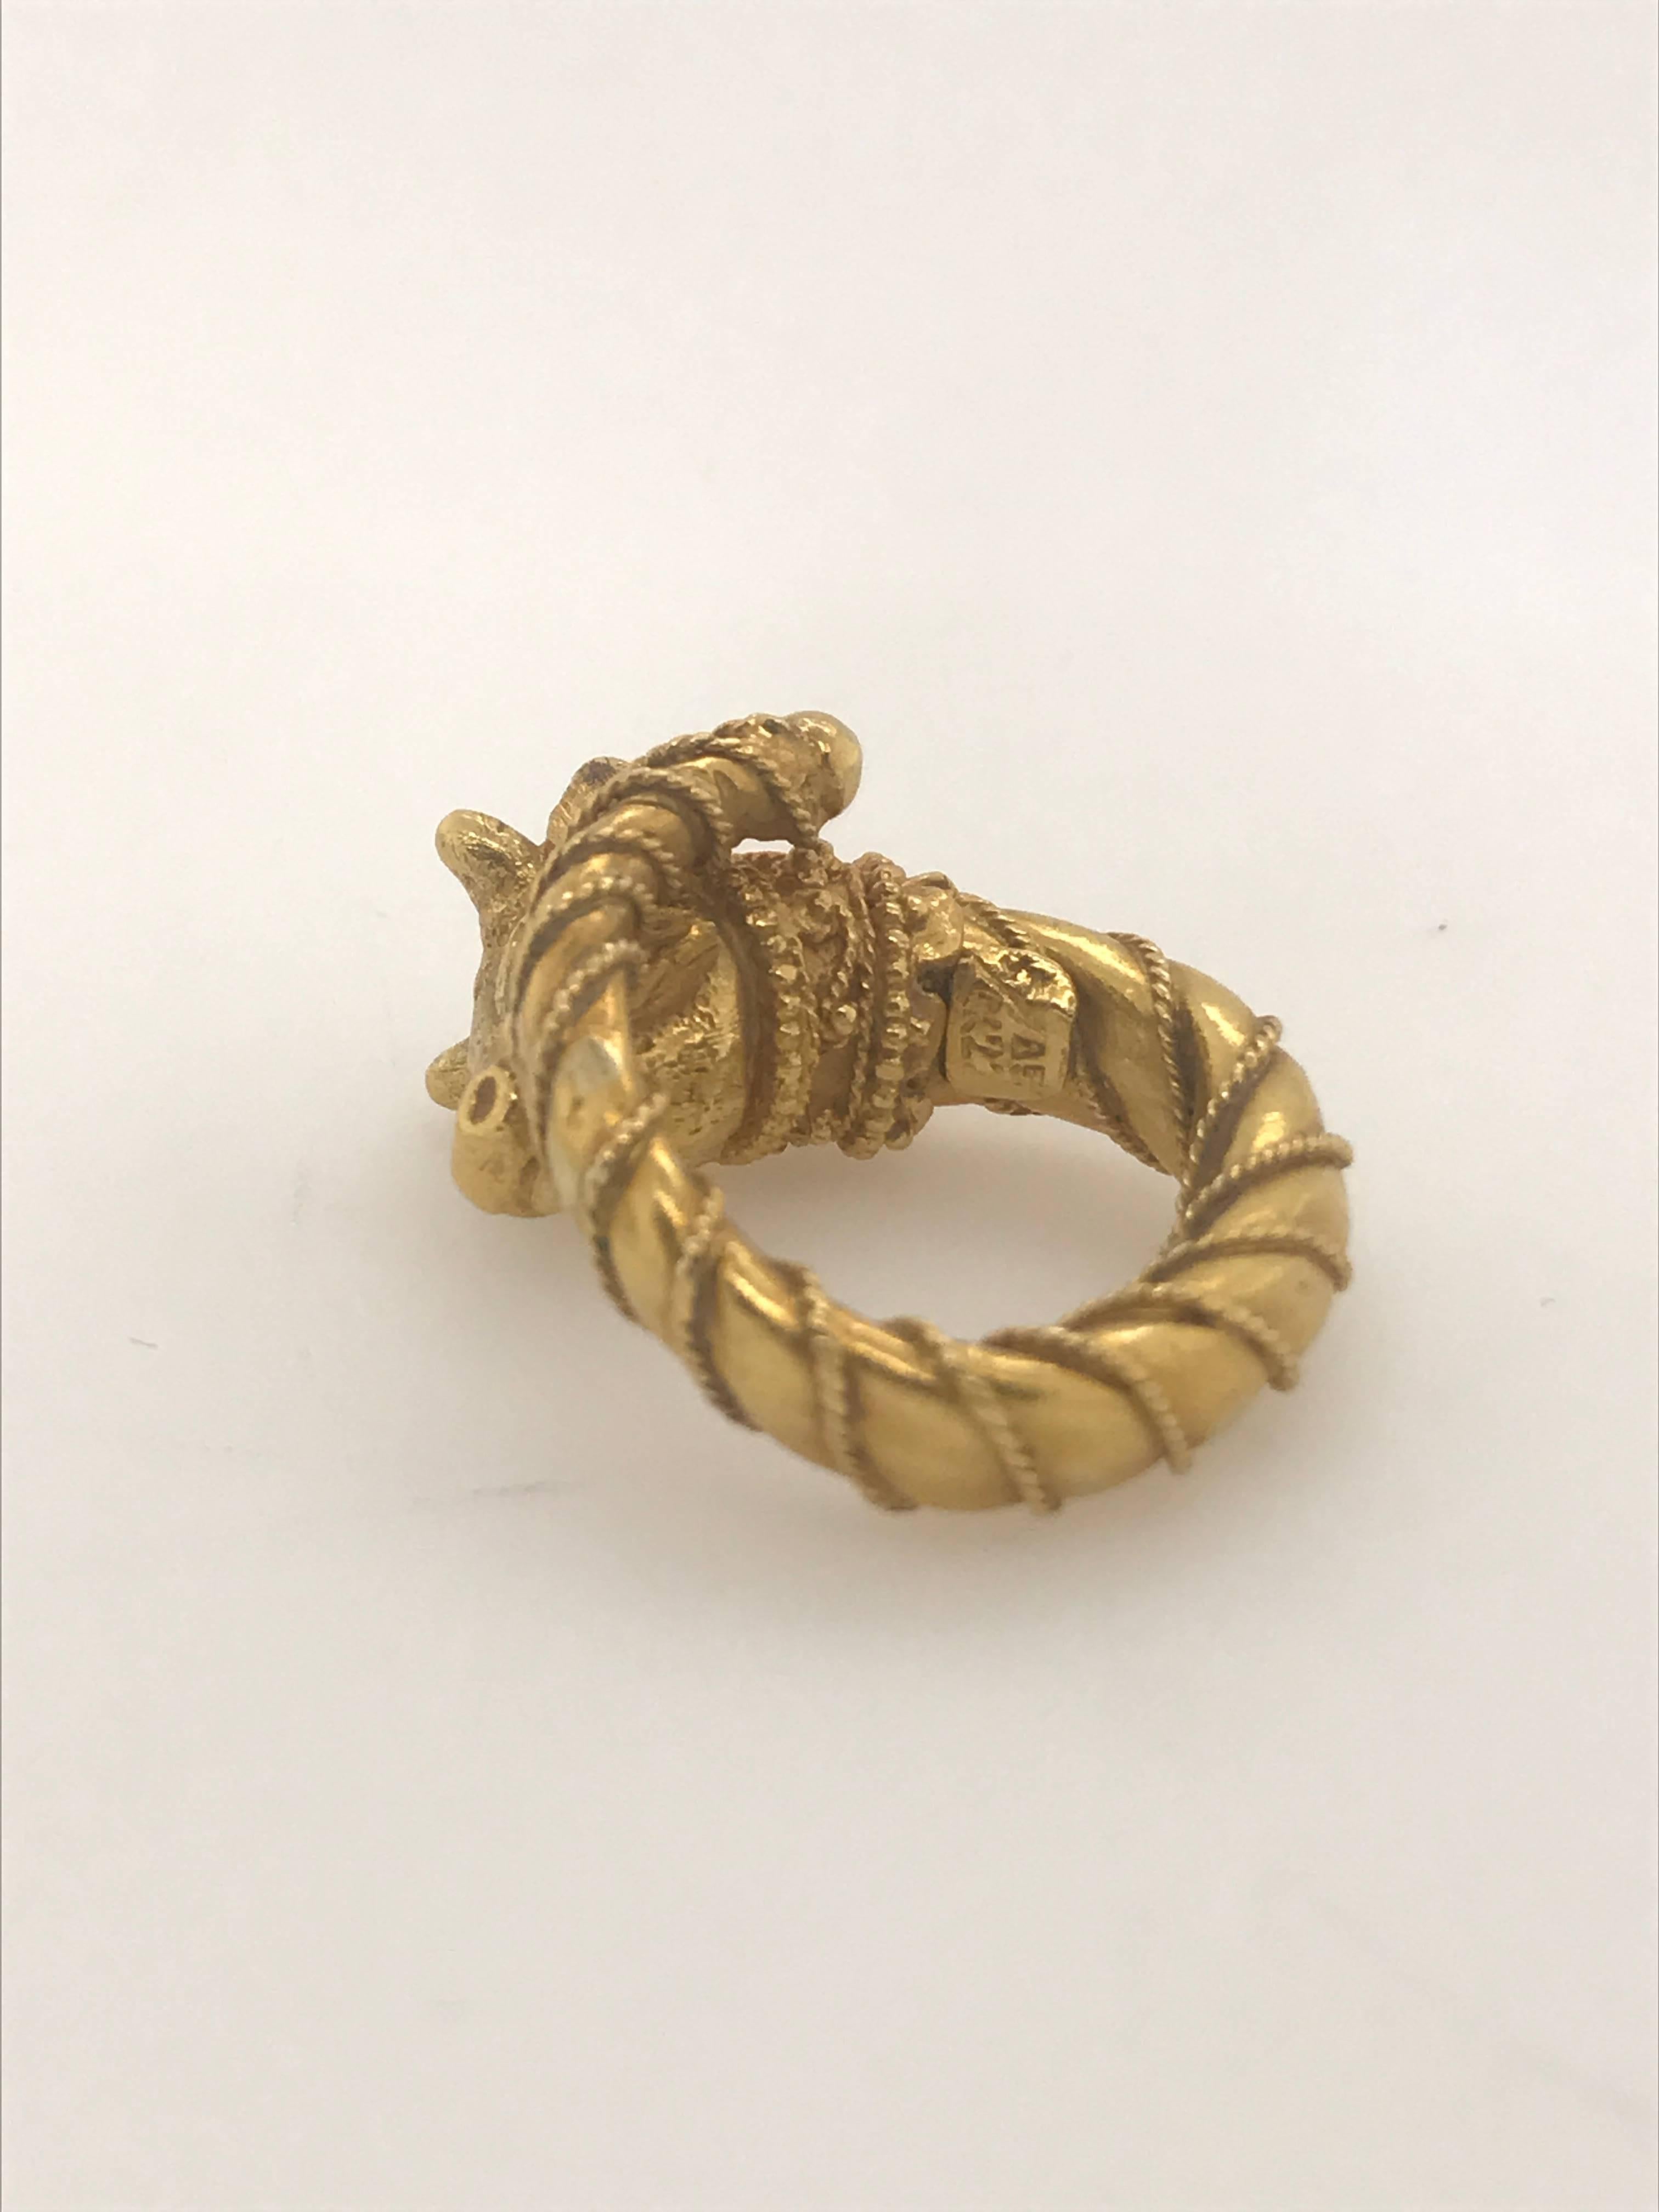 Decorative Ring by Zolotas in 22 Karat Yellow Gold 3